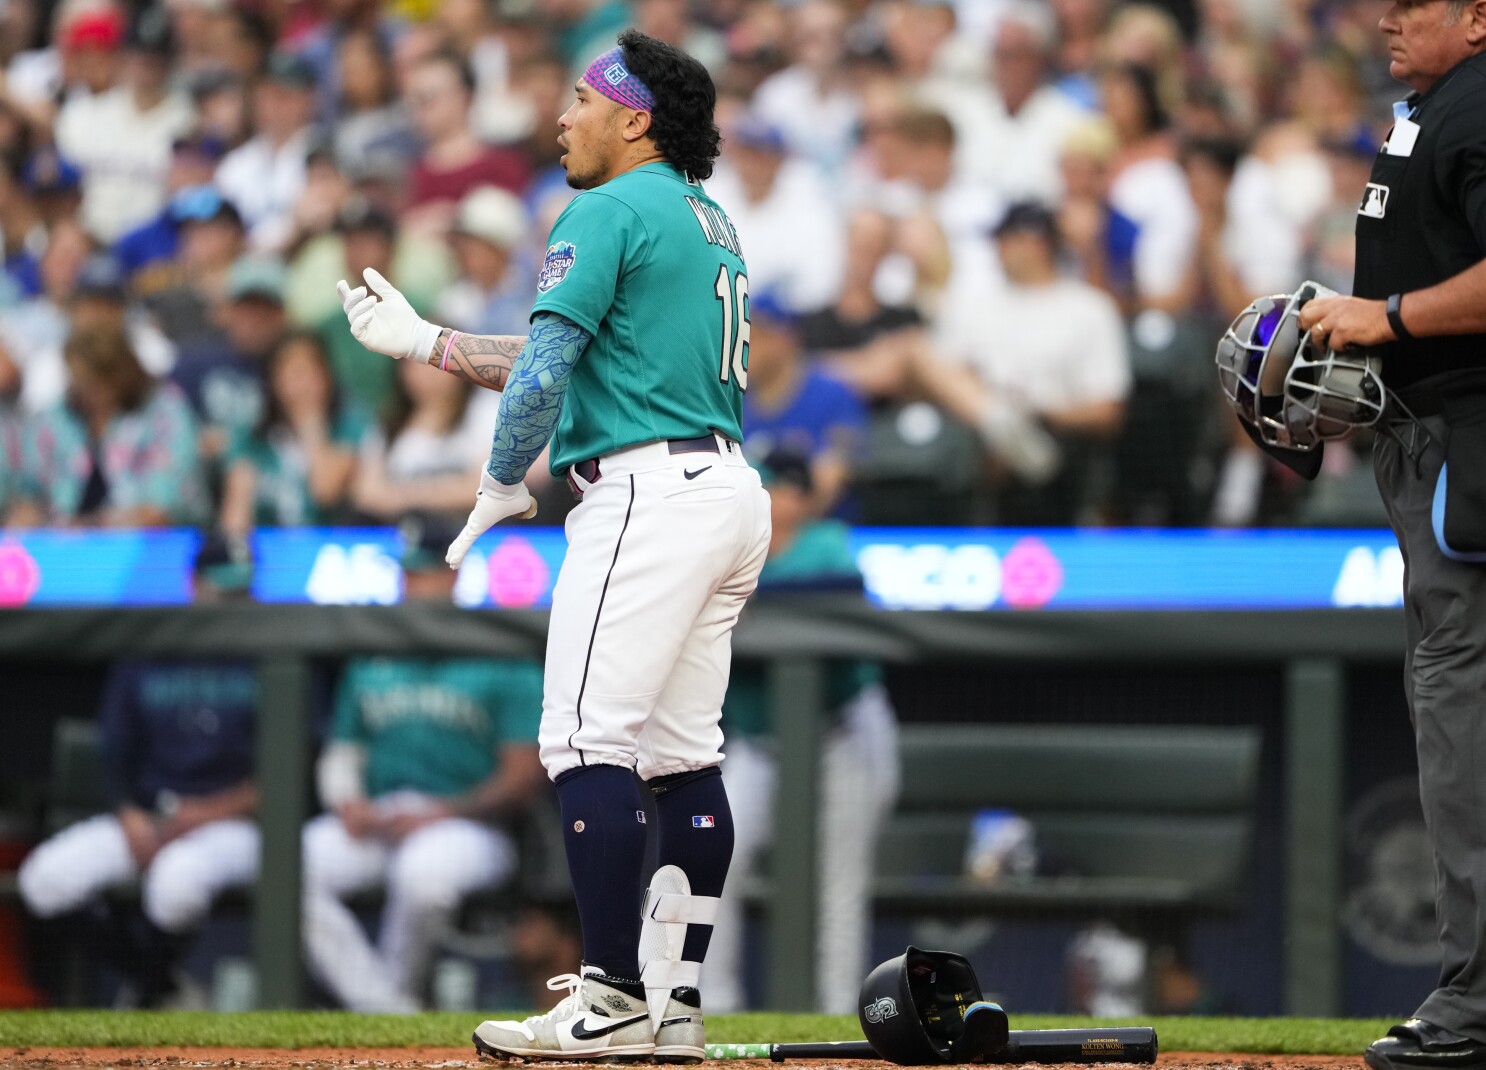 Meet the 2021 Mariners starting lineup